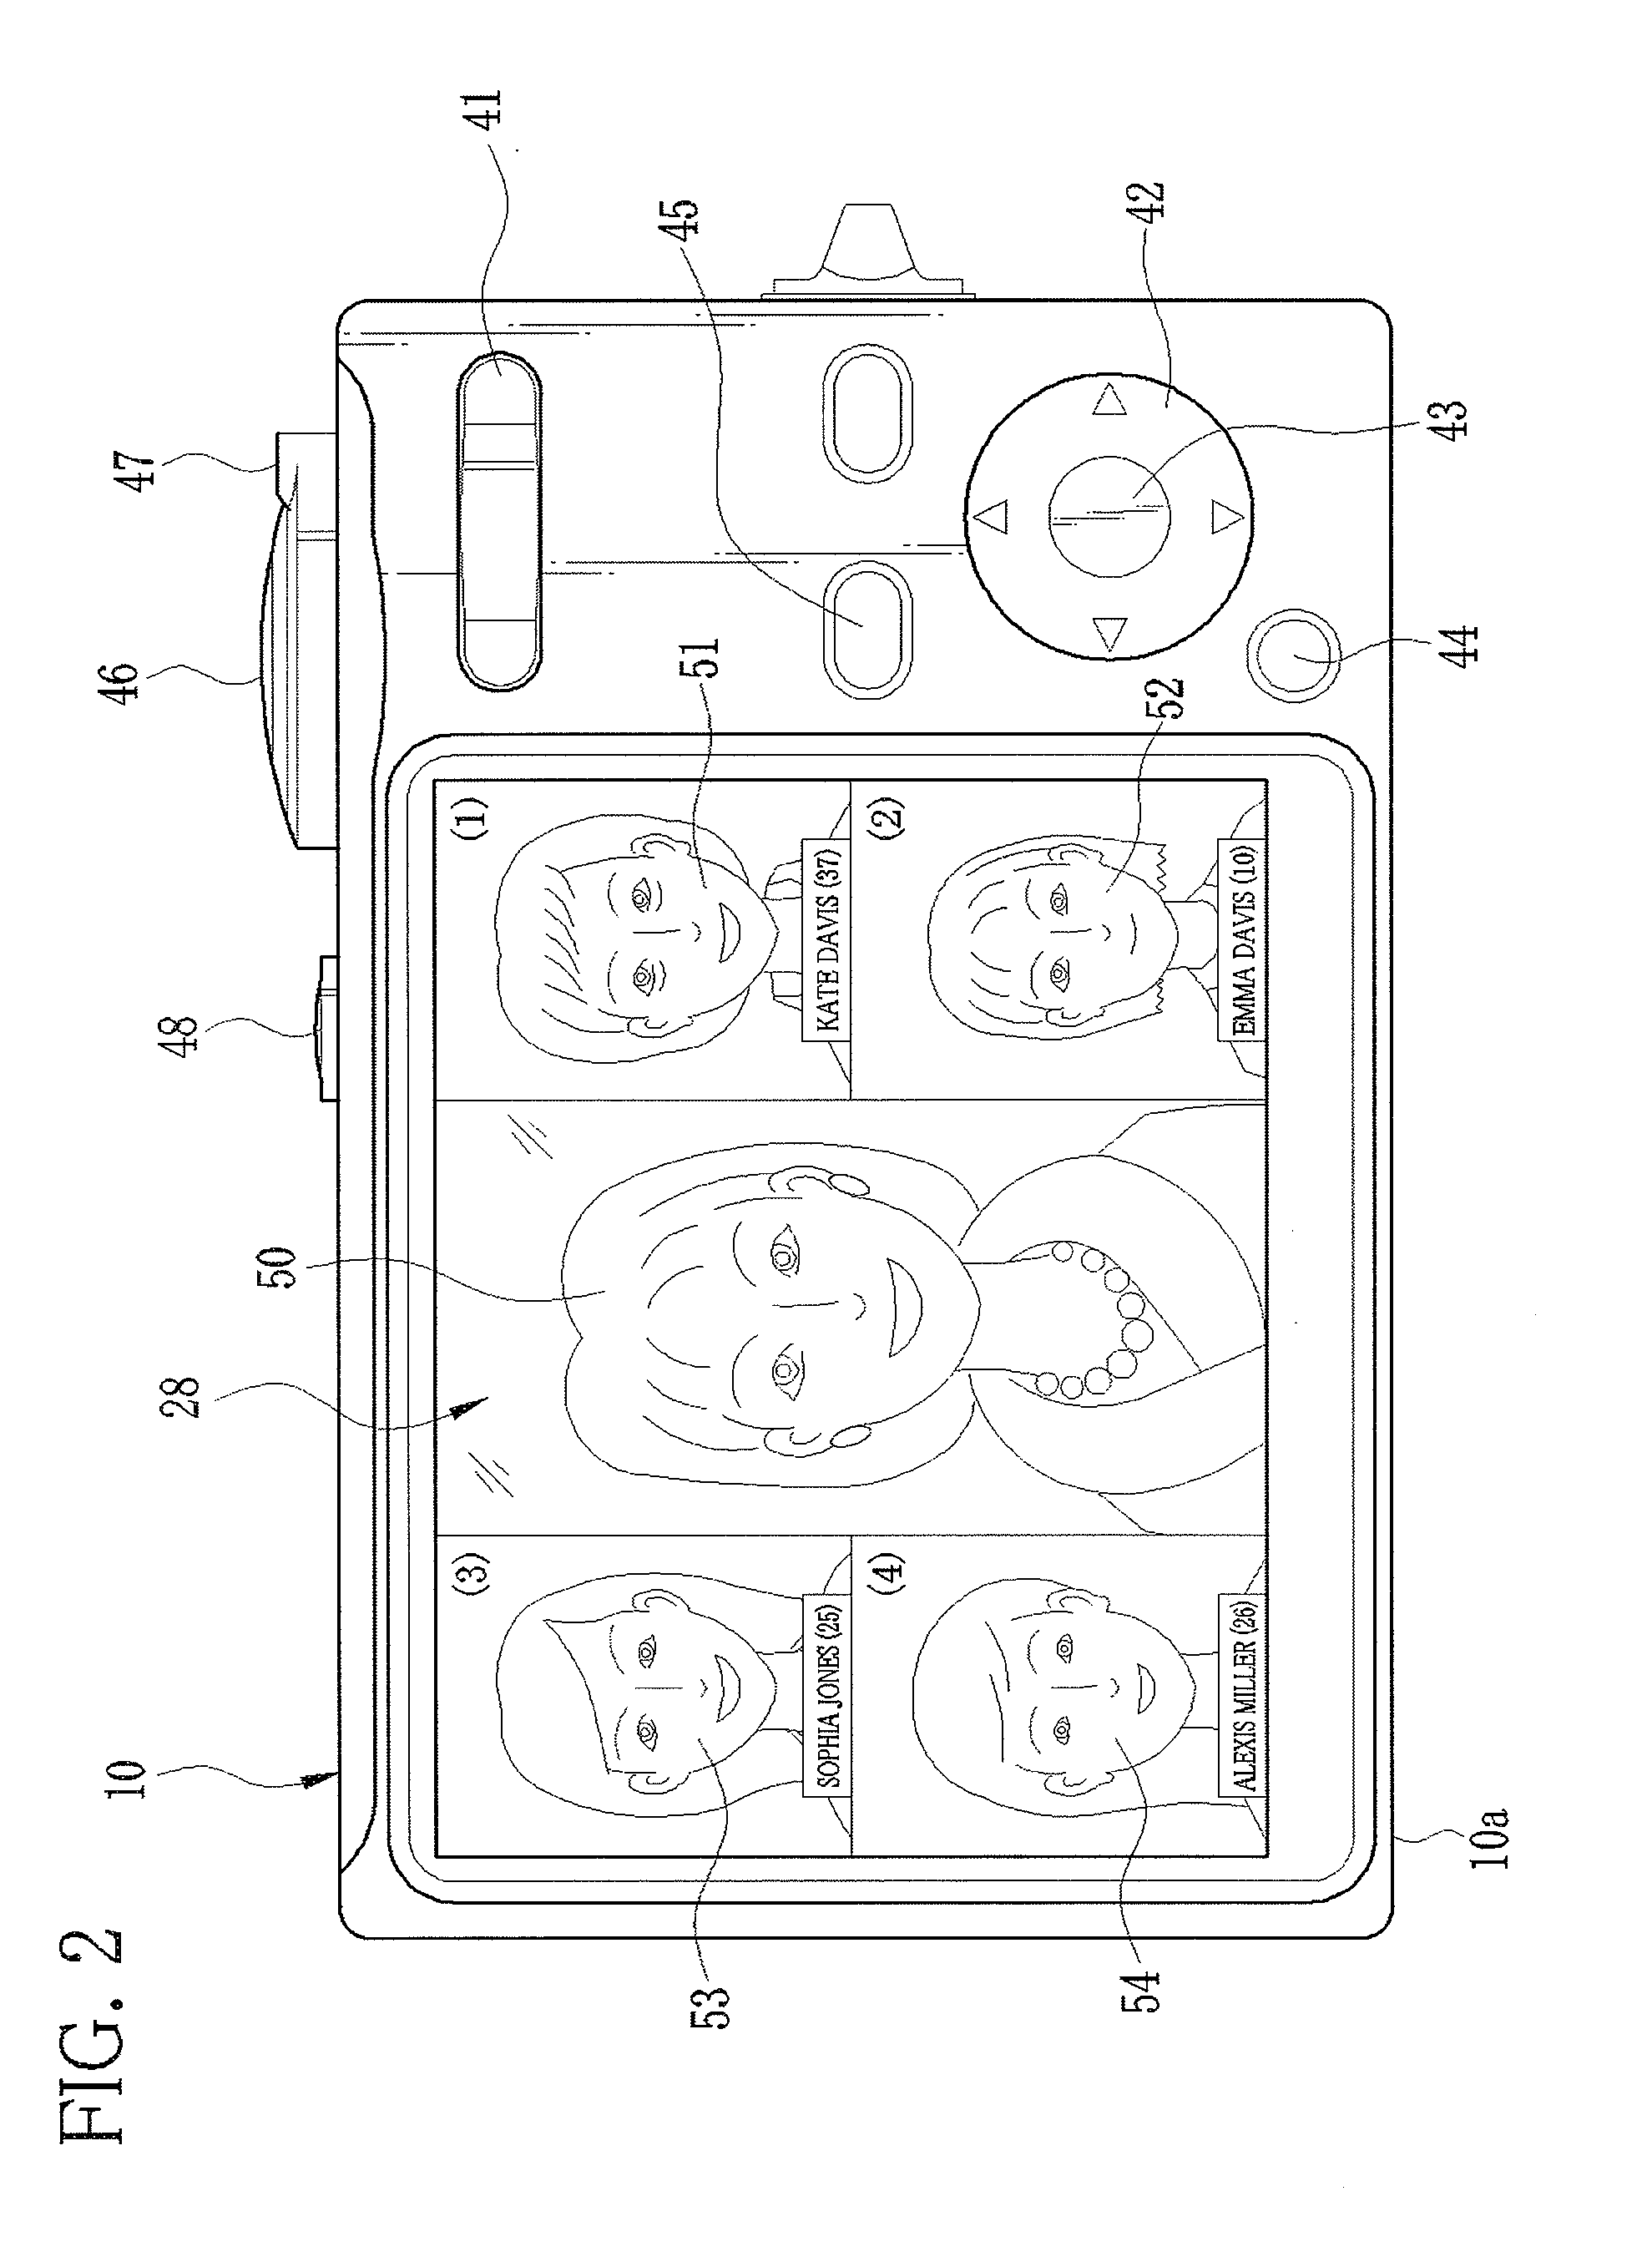 Person recognition method and apparatus